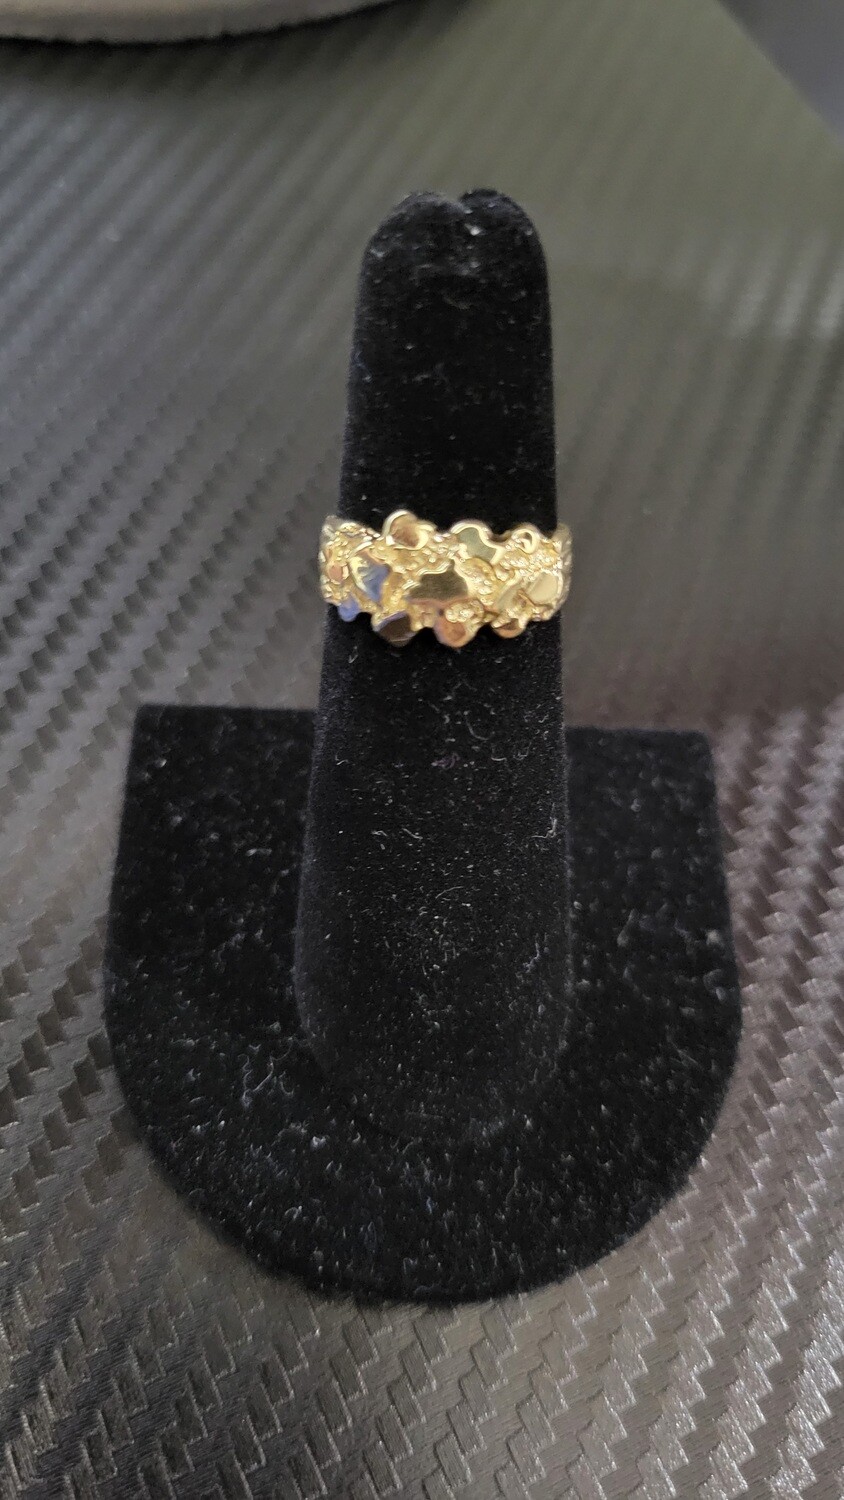 14K 8.5MM NUGGET RING, NOW IN STOCK!: 14K NUGGET RING APPROX. 4.2 GRAMS SIZE 11 1/2